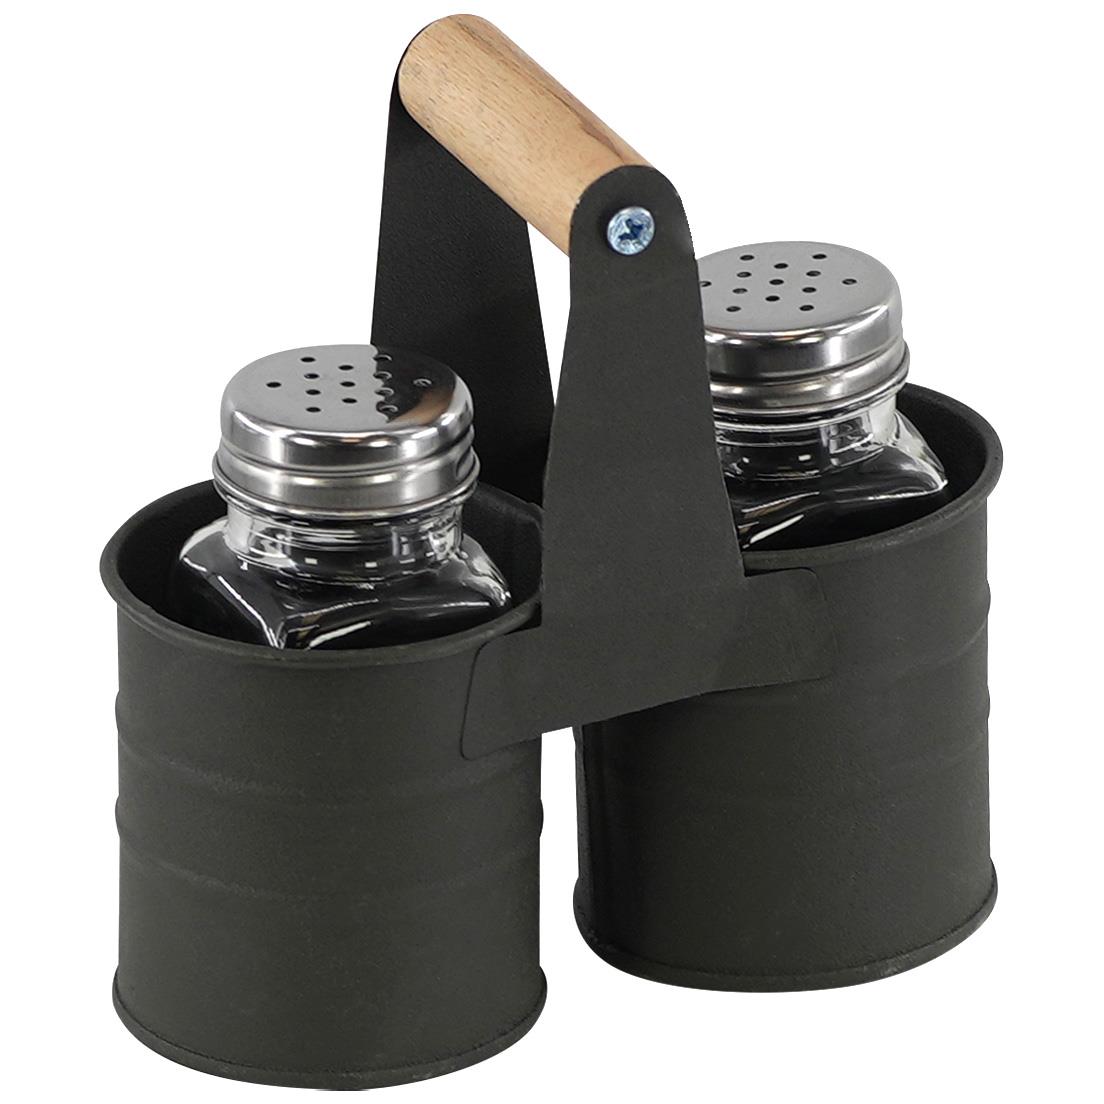 Salt And Pepper Shaker Set by GEEZY - UKBuyZone